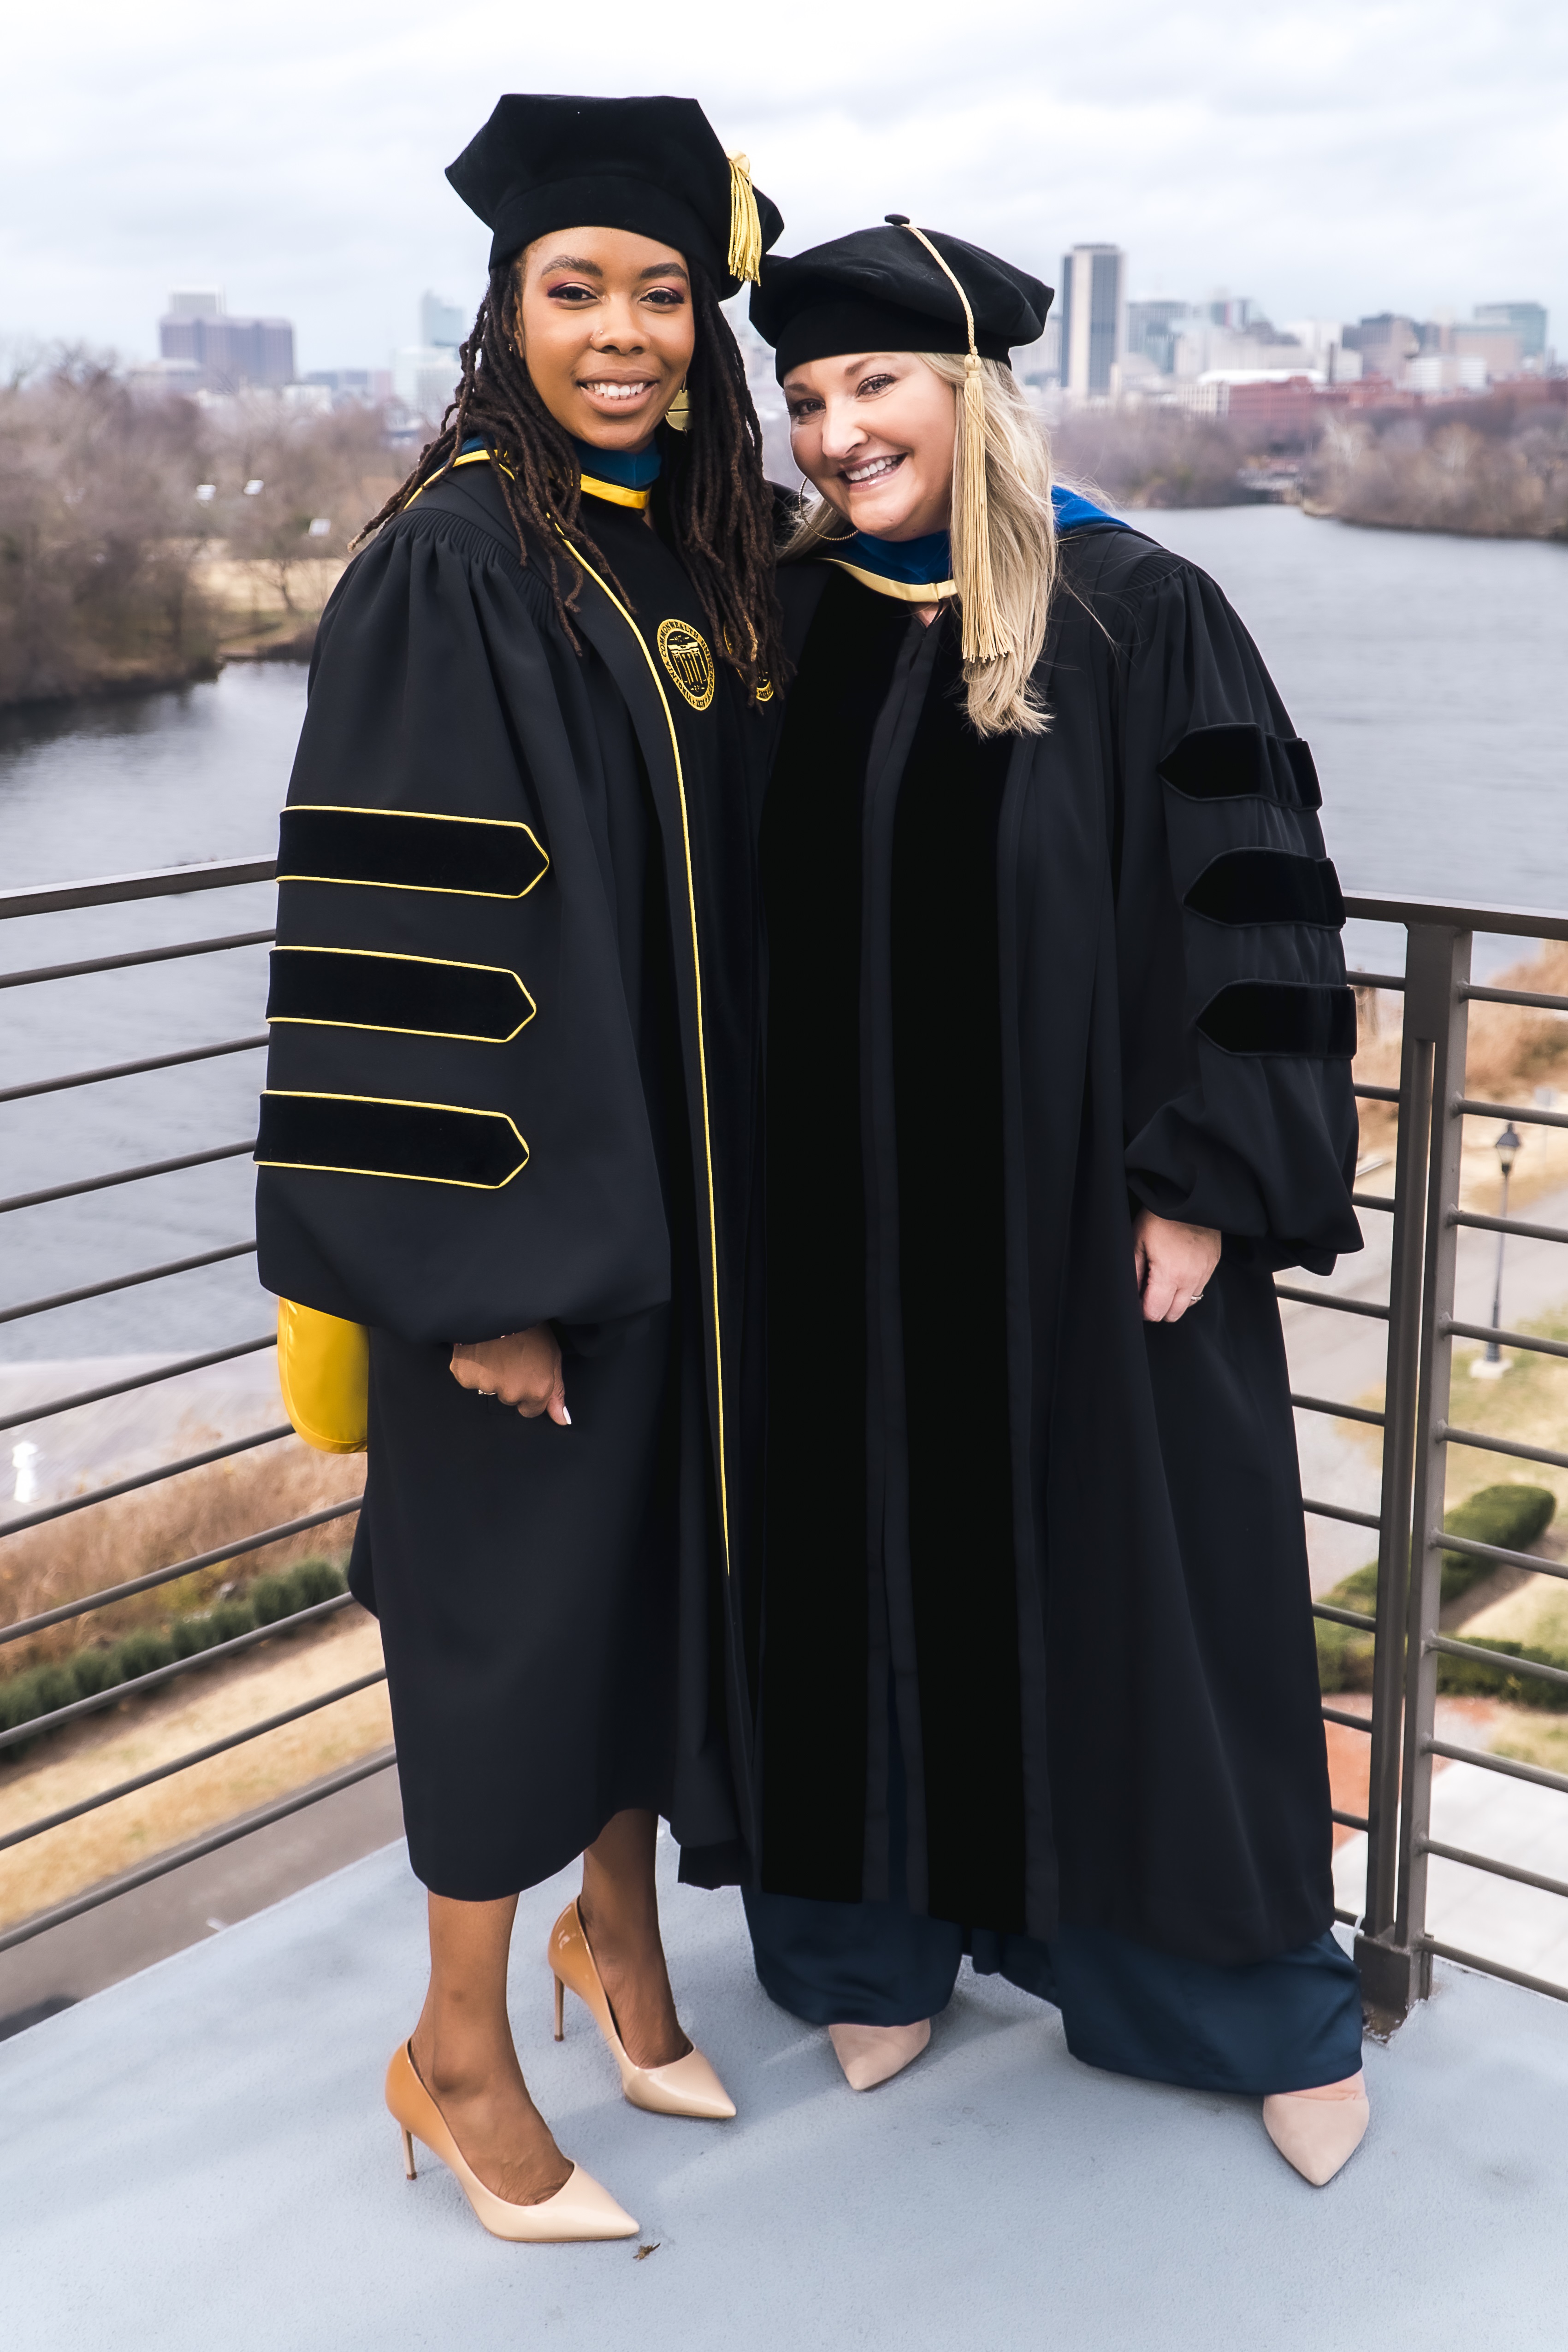 Dr. Brown and Dr. LaRose at 2021 commencement